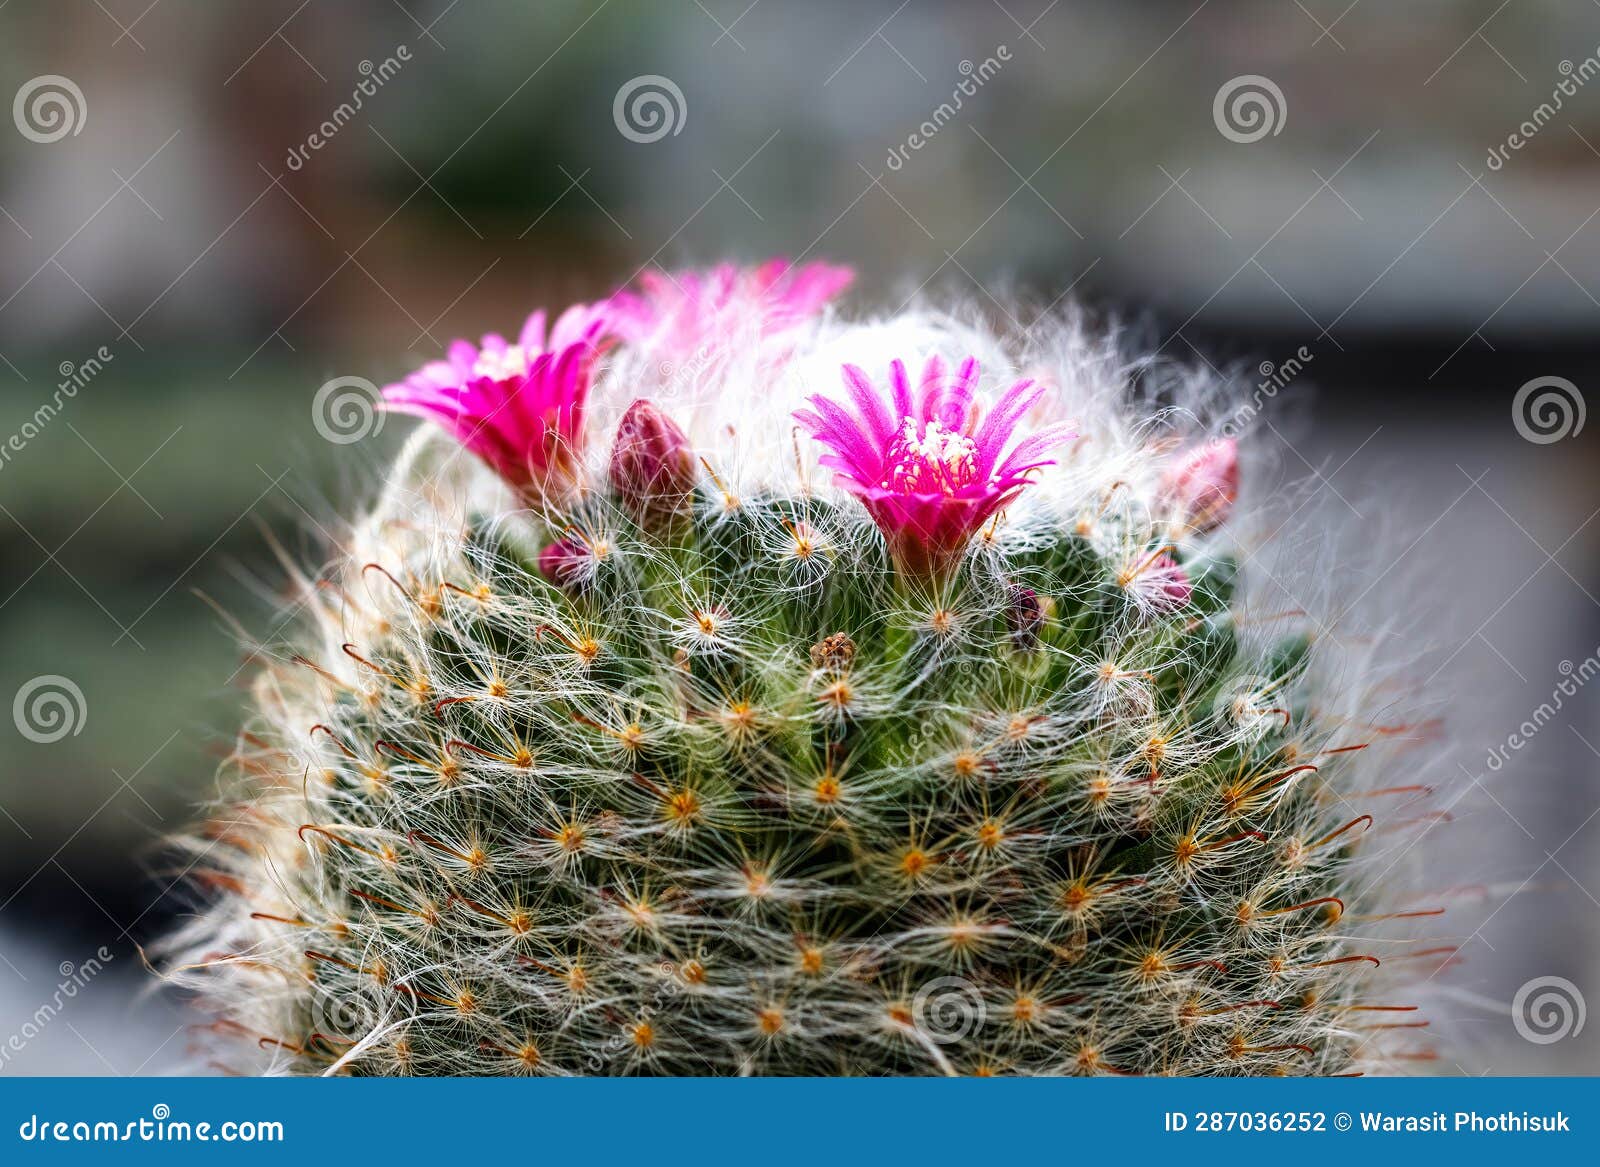 Mammillaria Benneckei, a Type of Cactus with Hook Spines There is